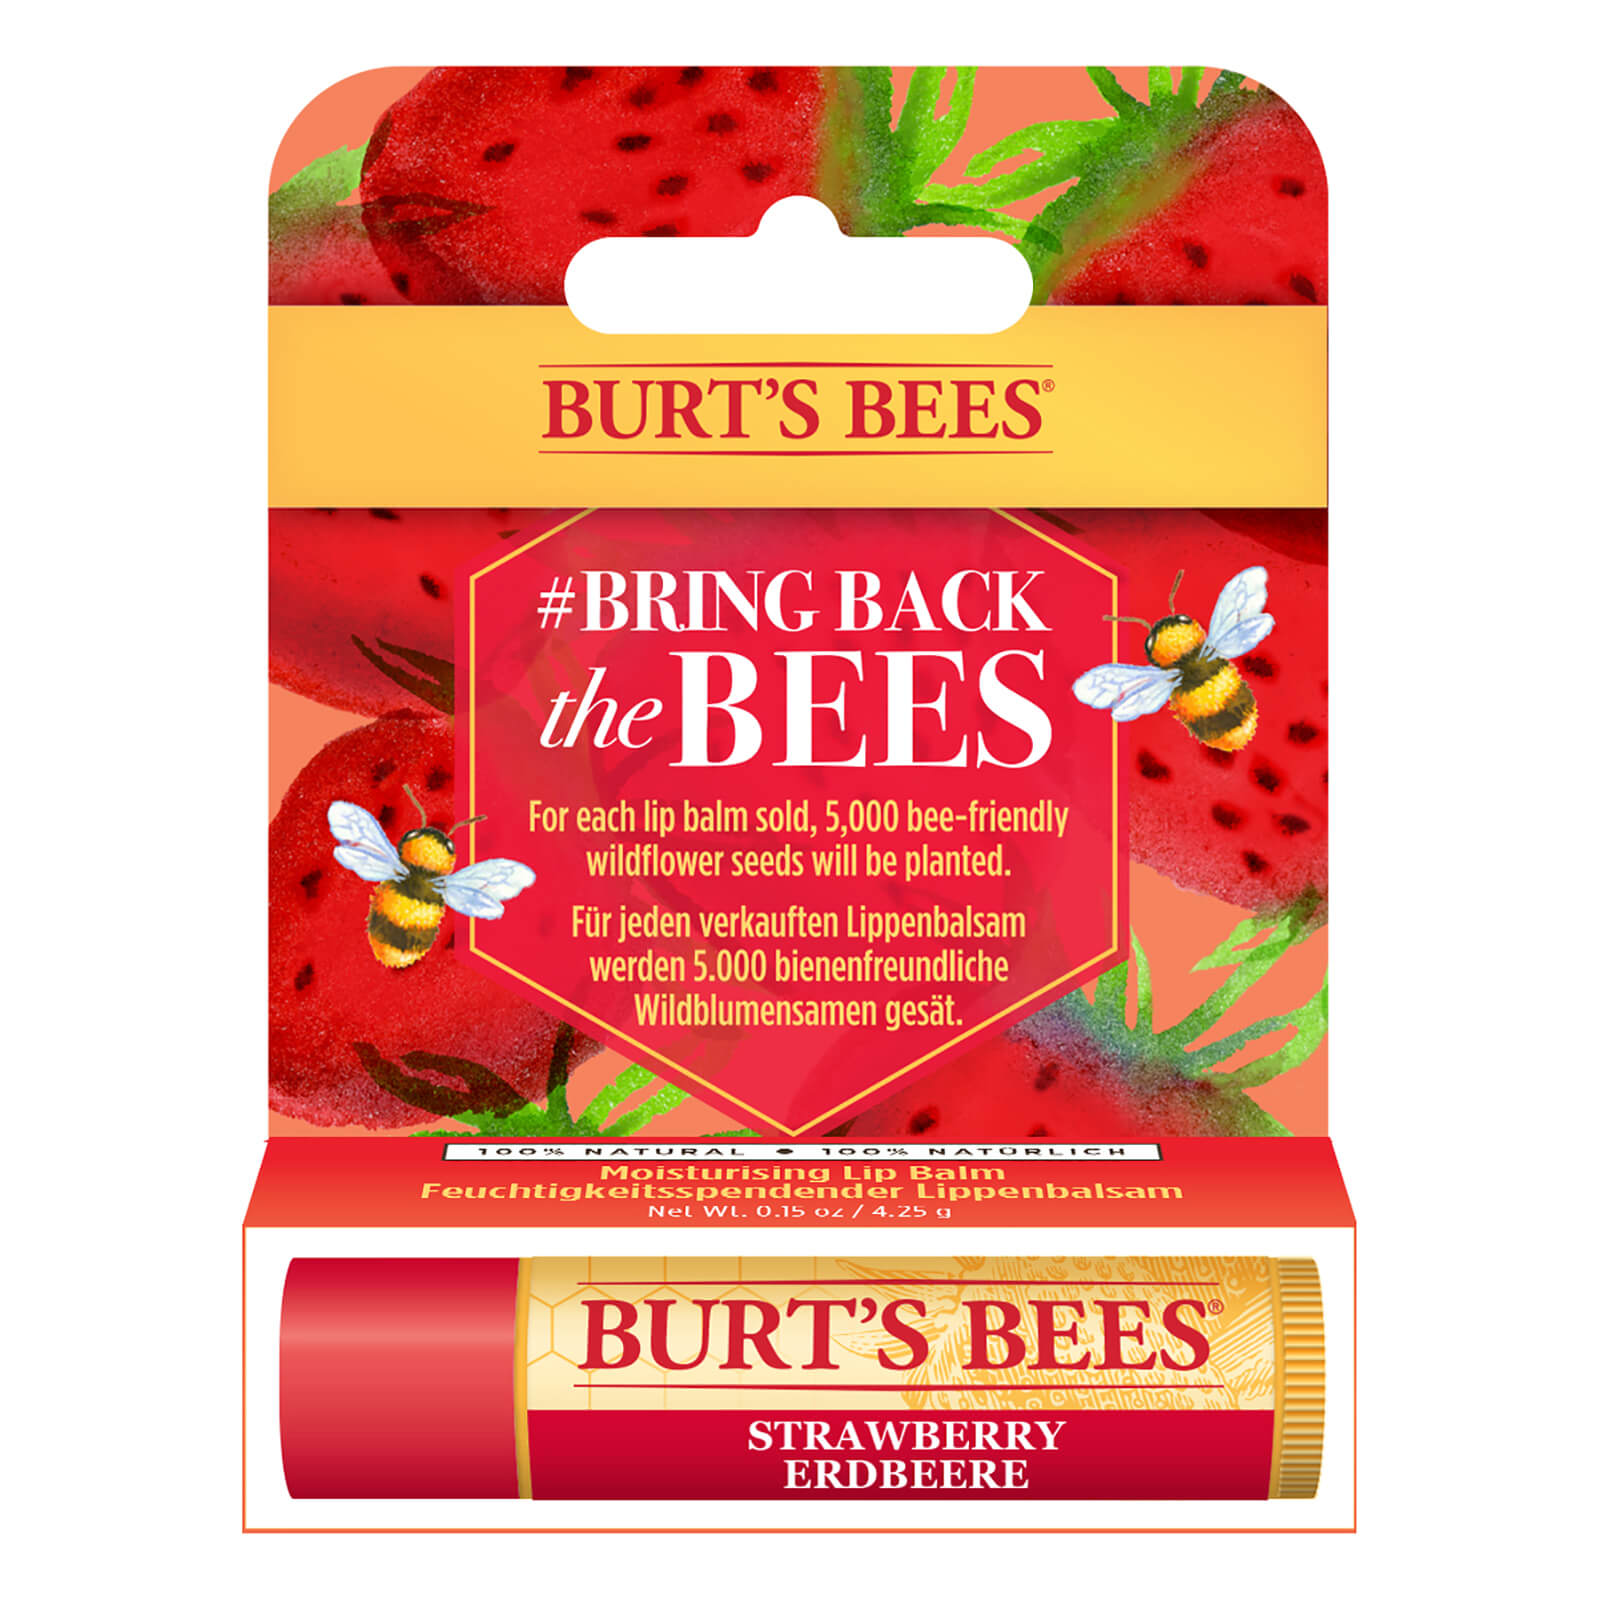 Bálsamo labial Strawberry Limited Edition Bring Back the Bees de Burt's Bees